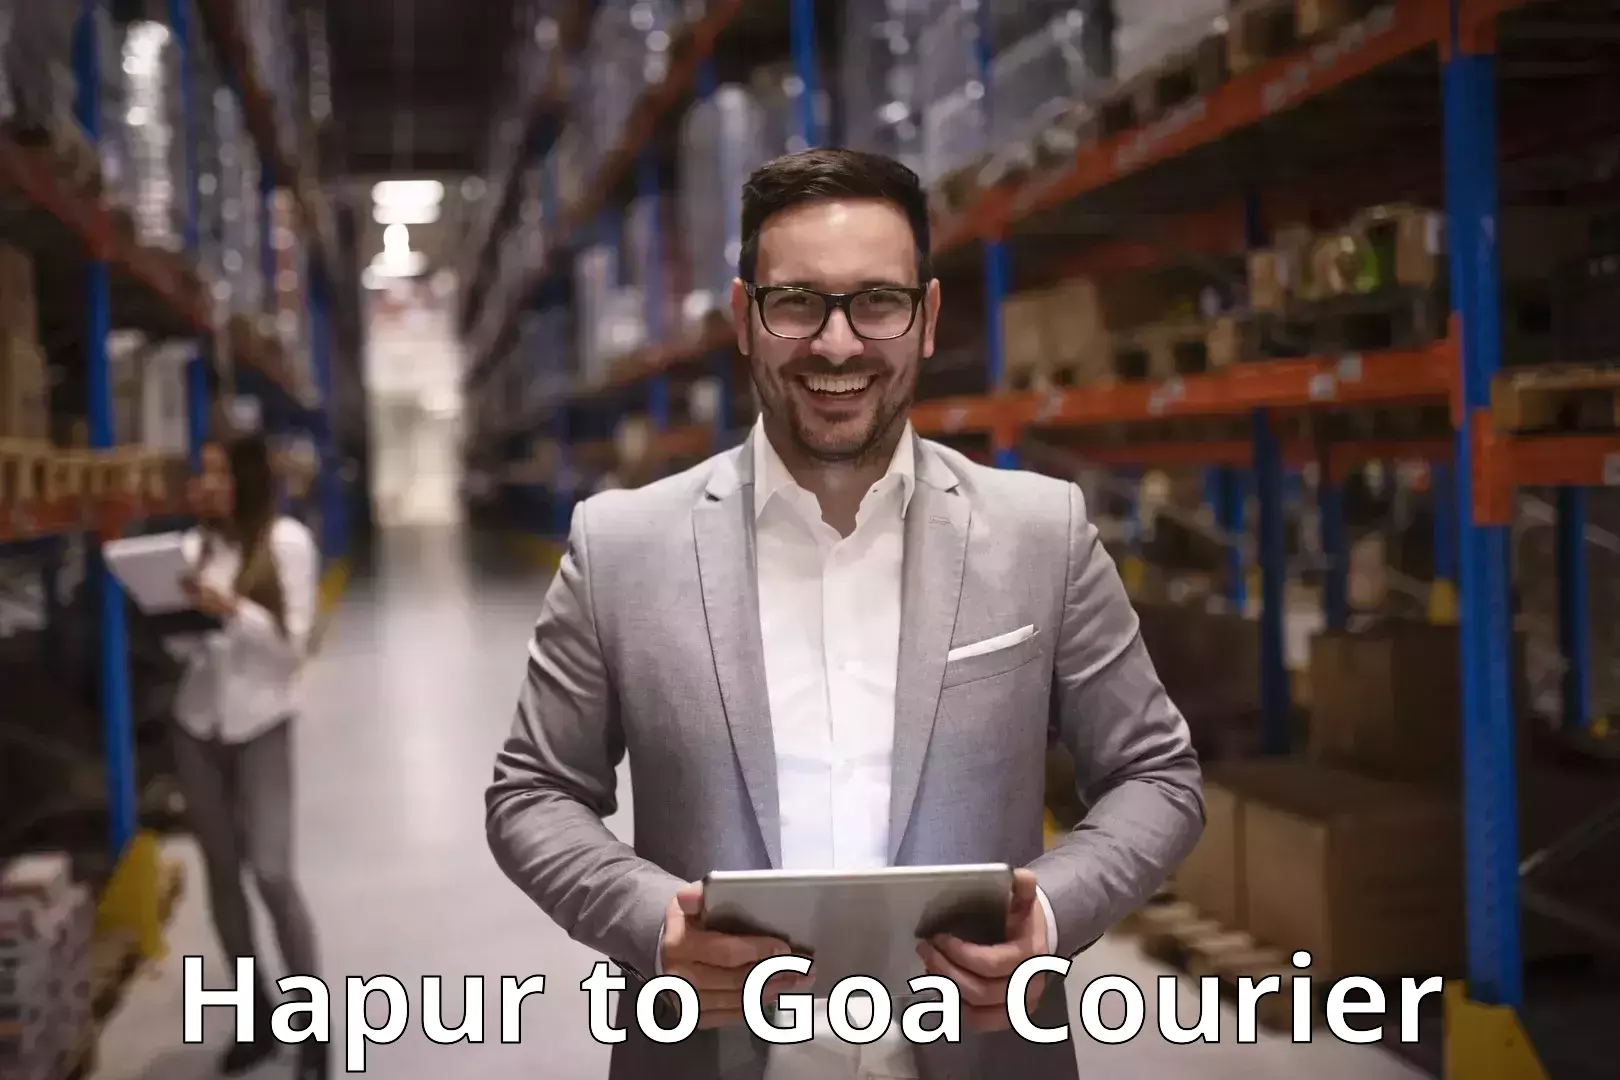 State-of-the-art courier technology Hapur to Goa